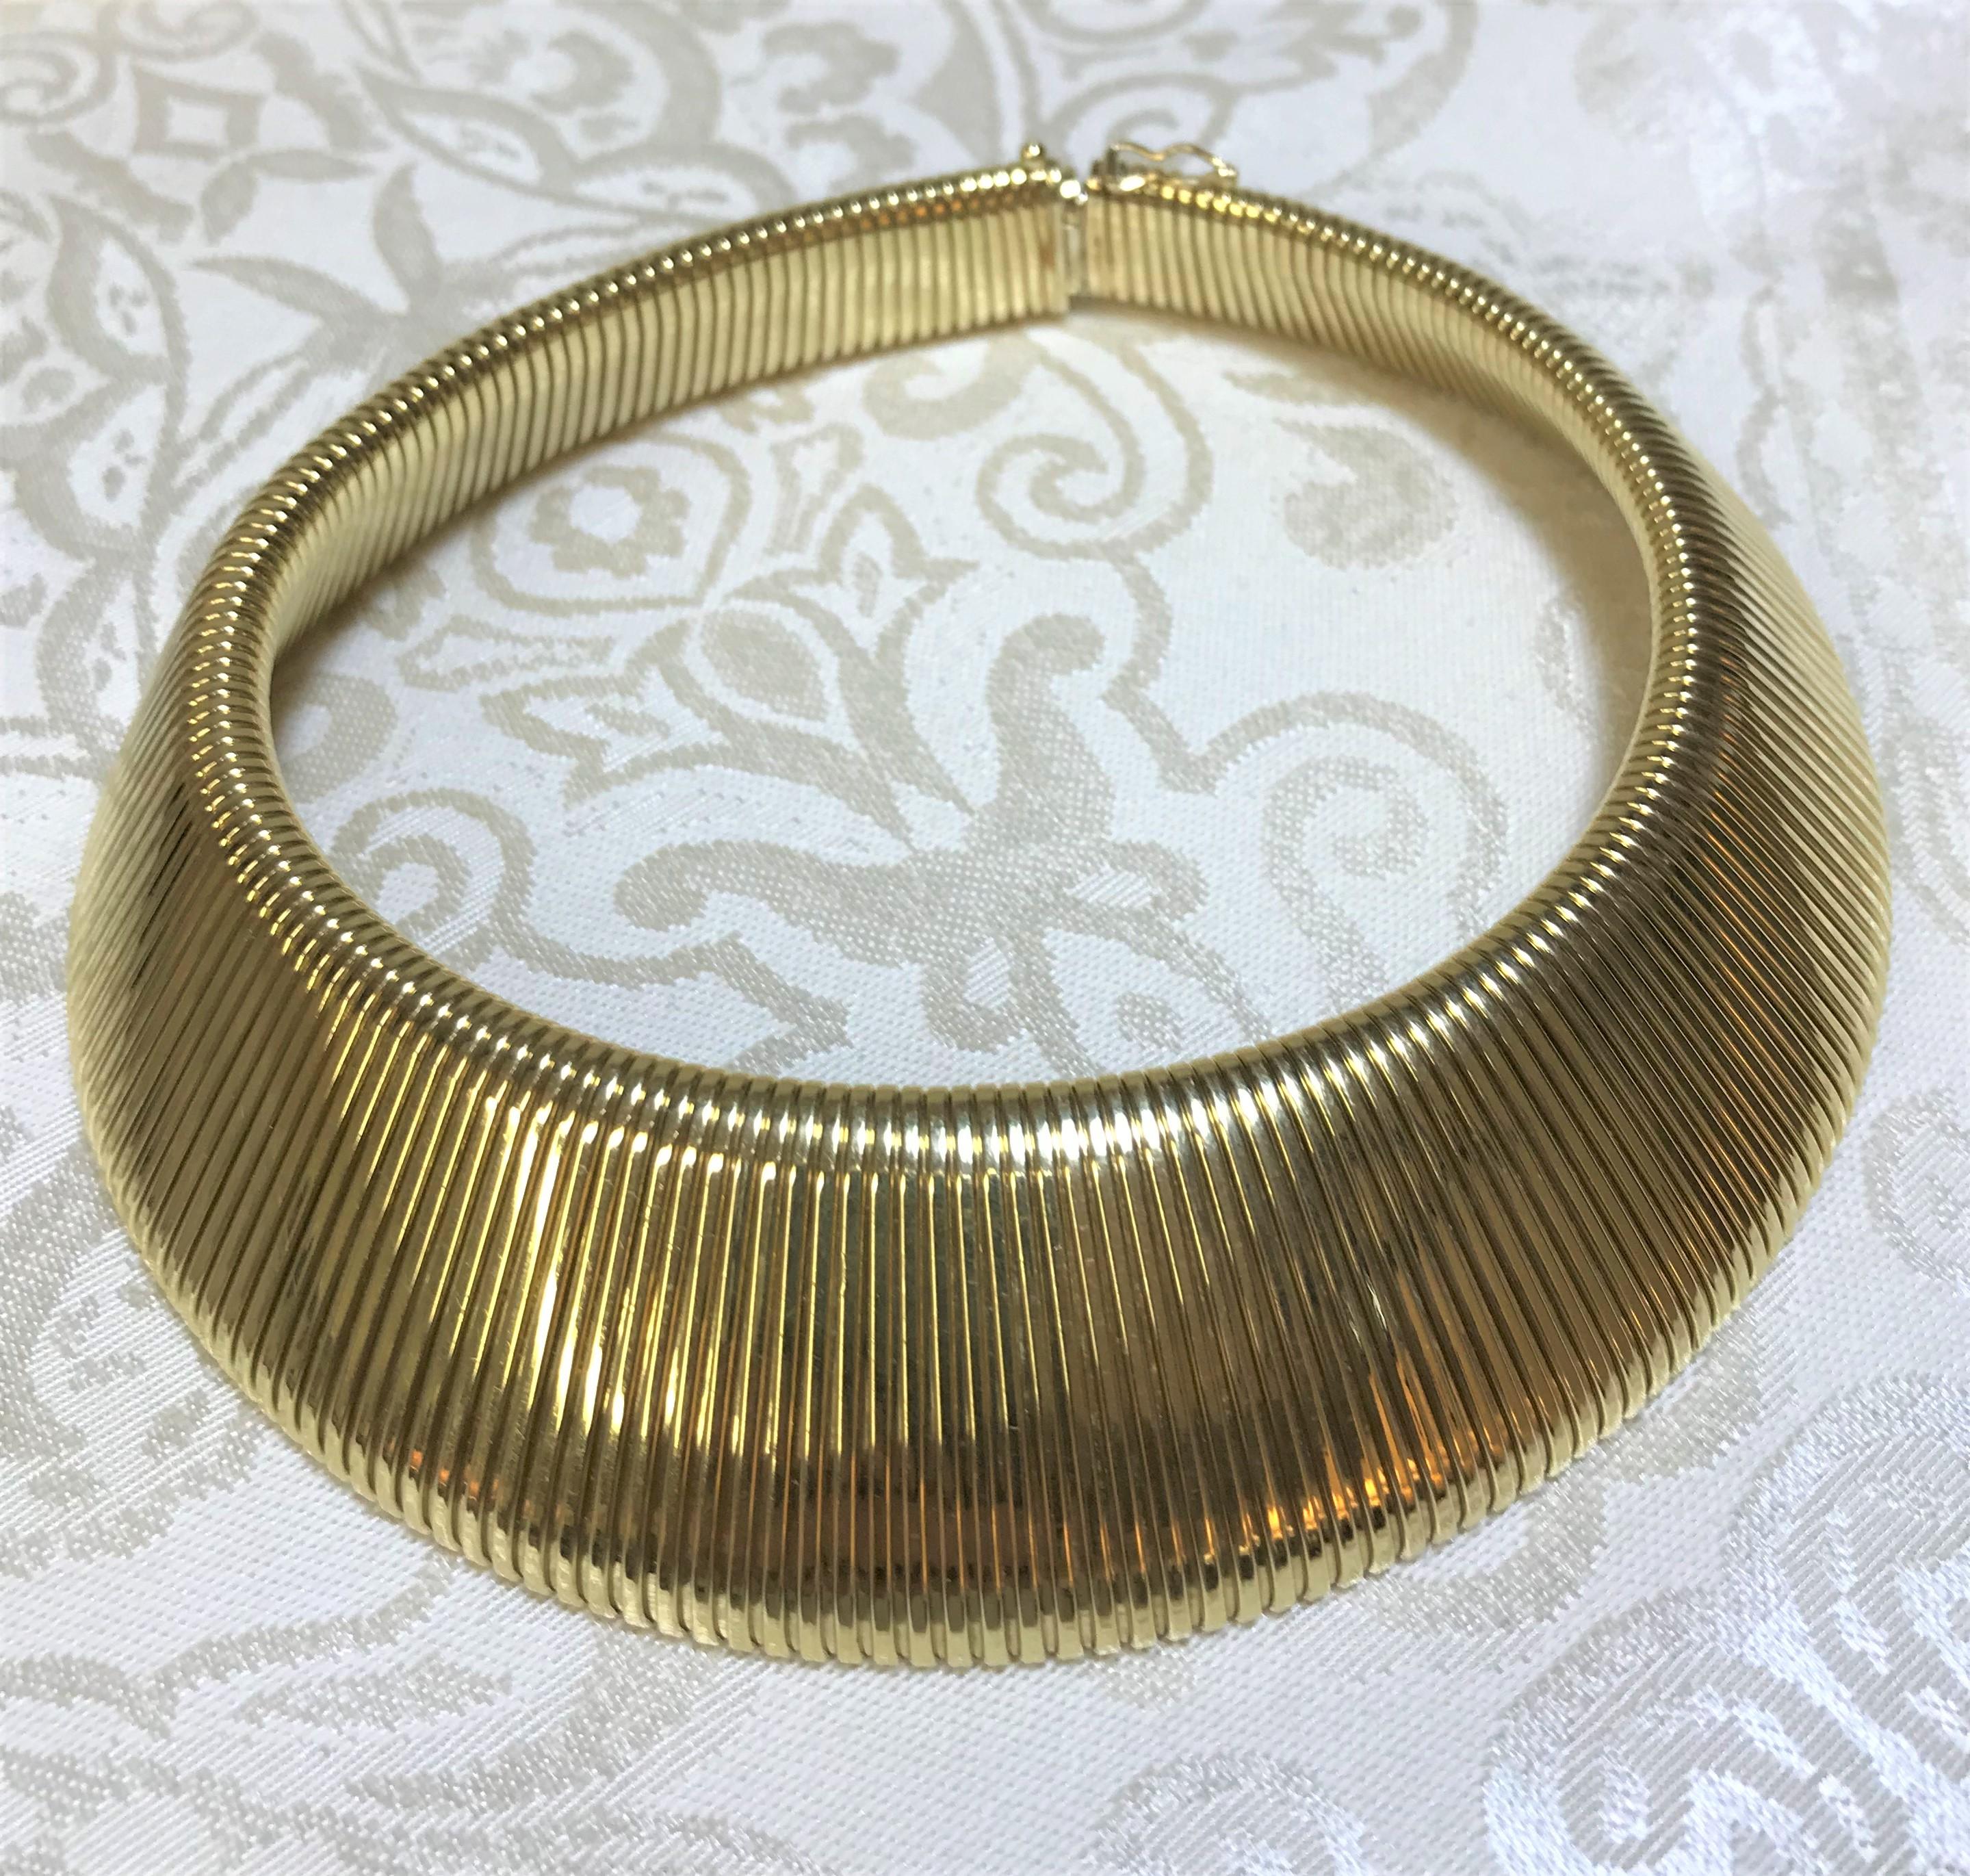 This beautiful omega choker will complete any outfit!  Light weight, flexible and very easy to wear; this piece rests nicely on the neck - very flattering!
14 karat yellow gold
Graduates from approximately .75 inches to 1.75 inches